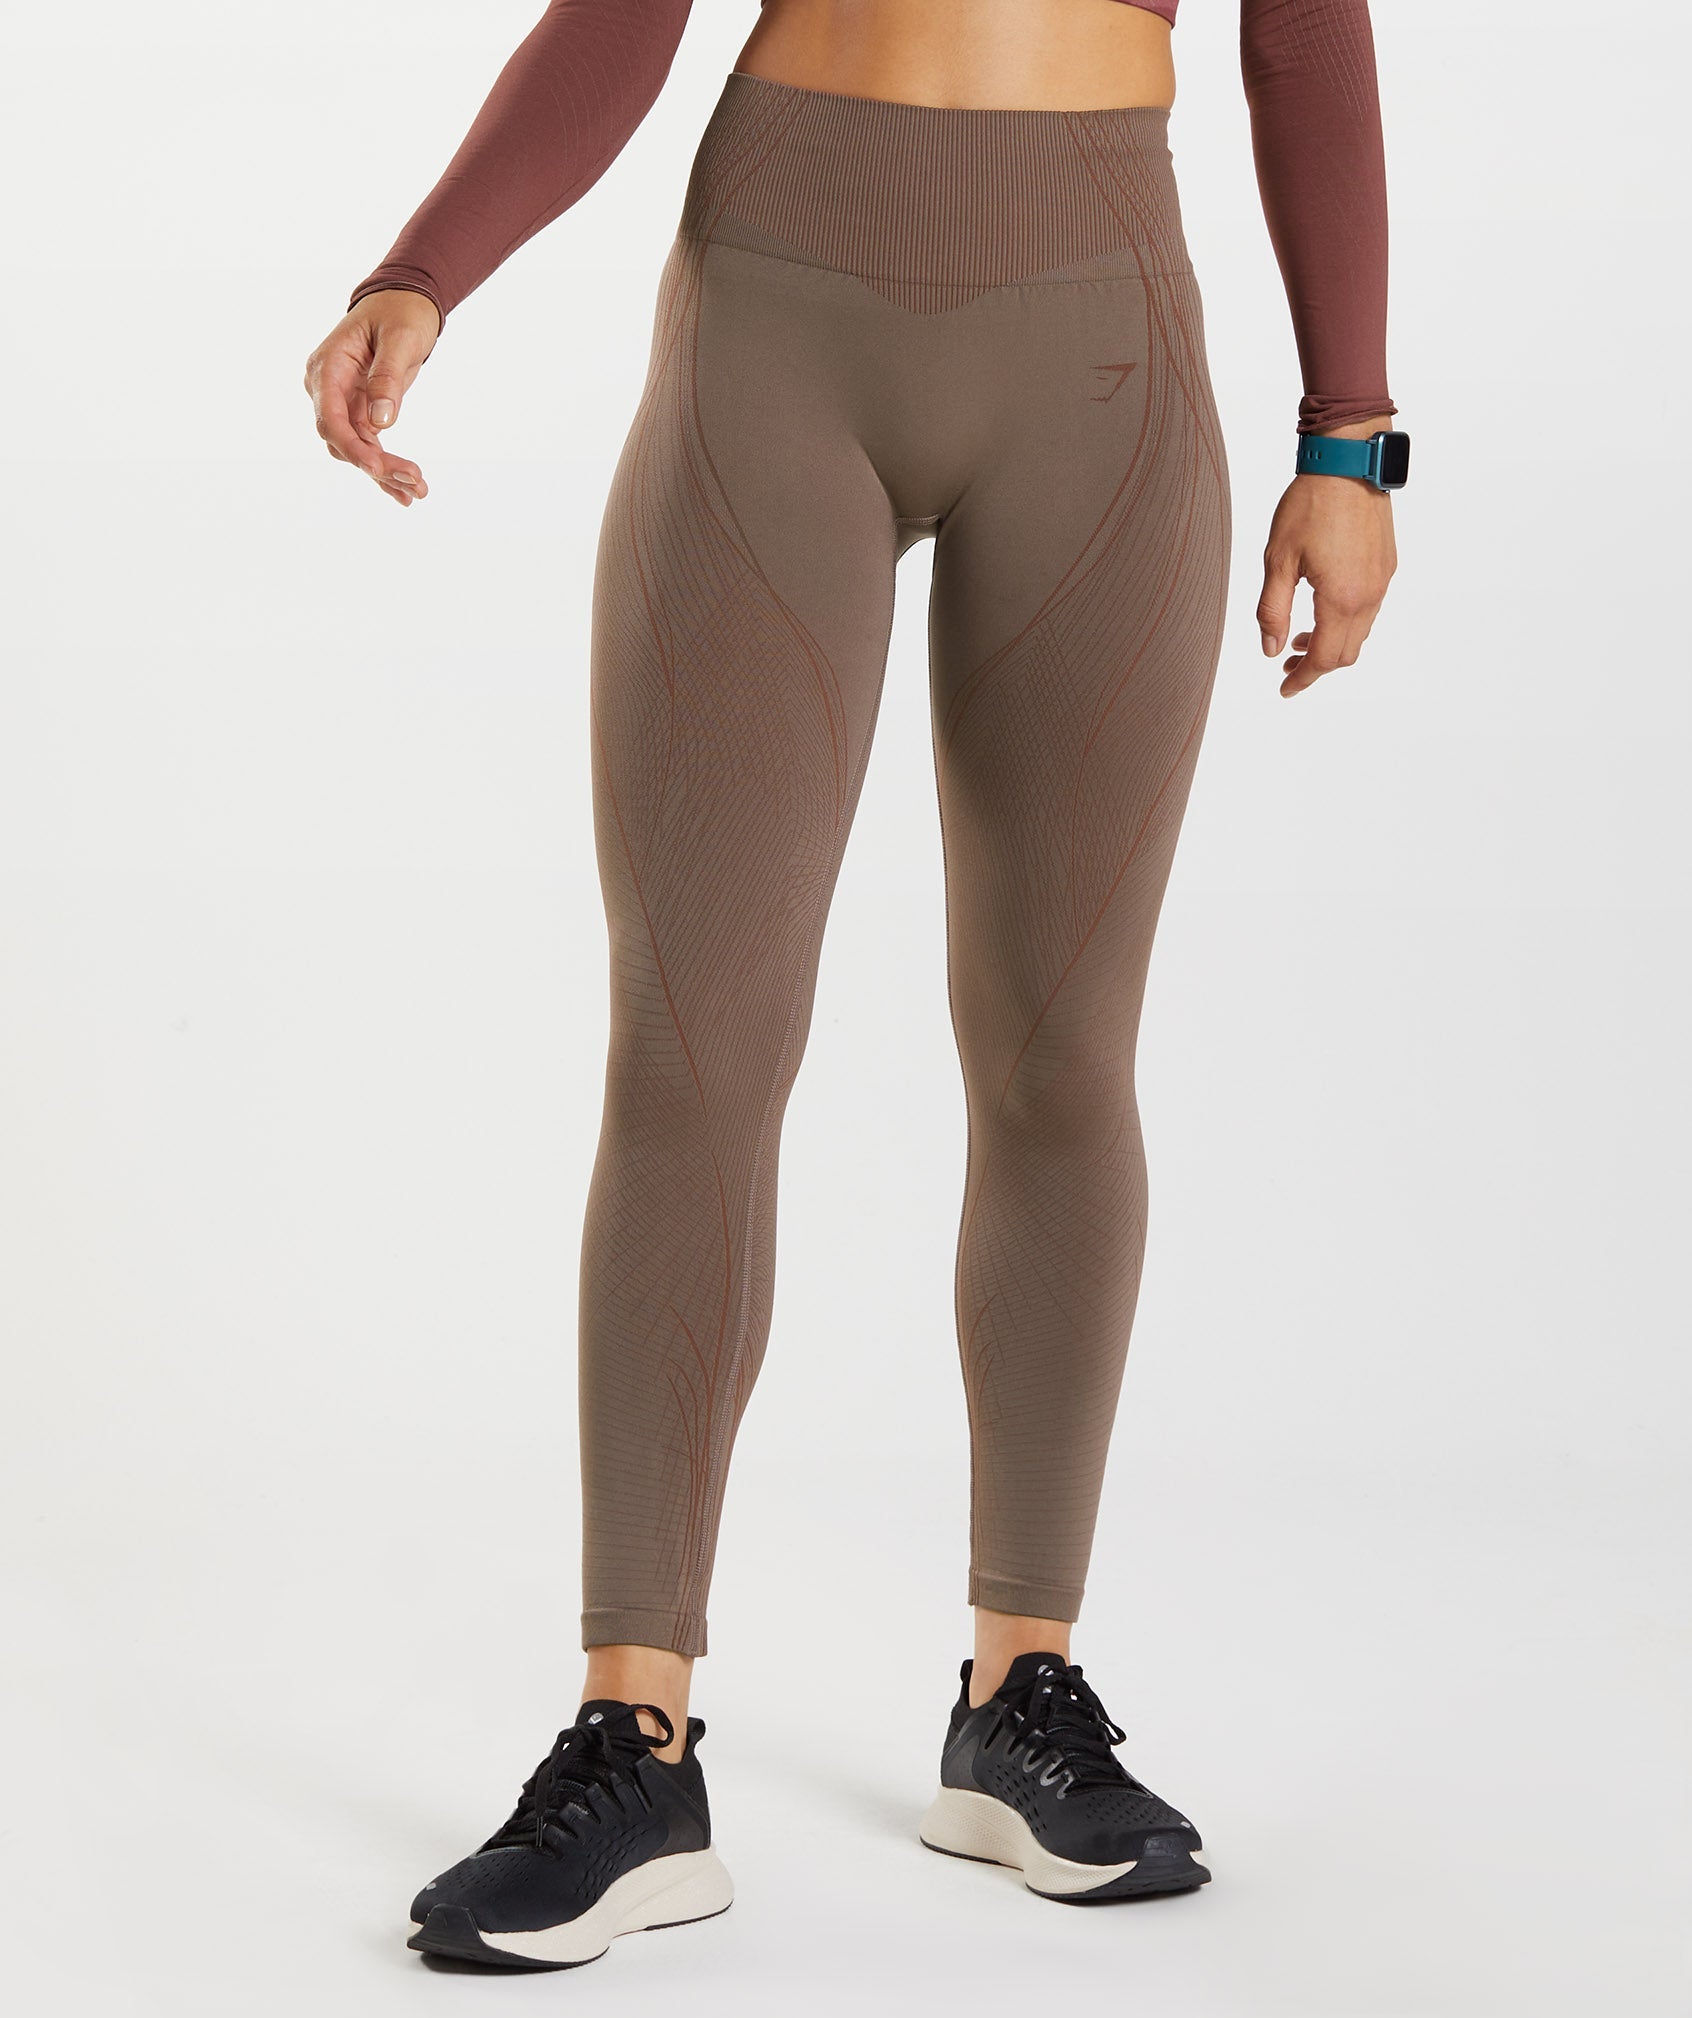 Shop Myprotein Sports Leggings for Women up to 70% Off